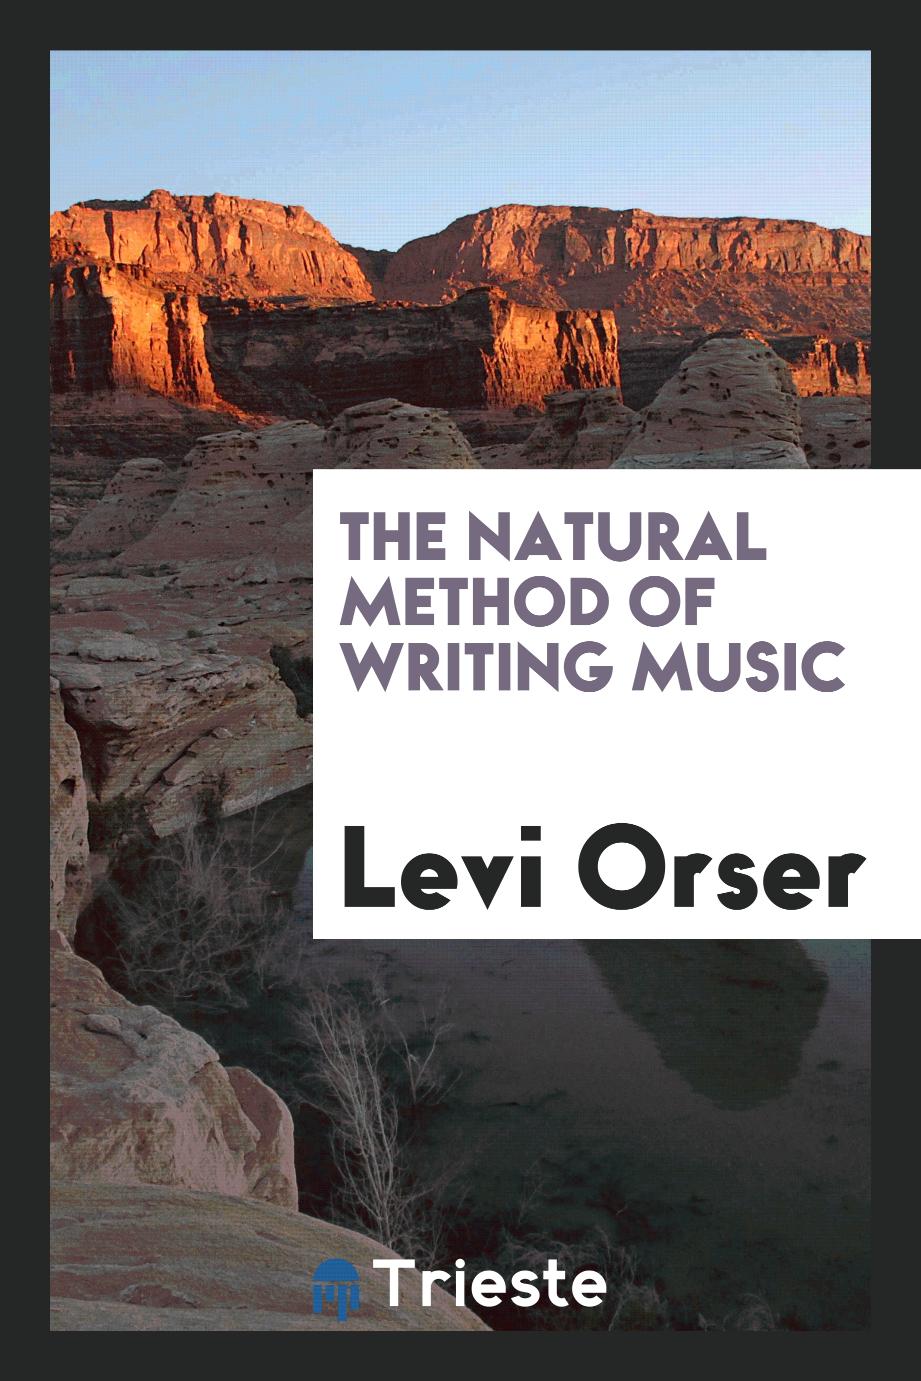 The Natural Method of Writing Music